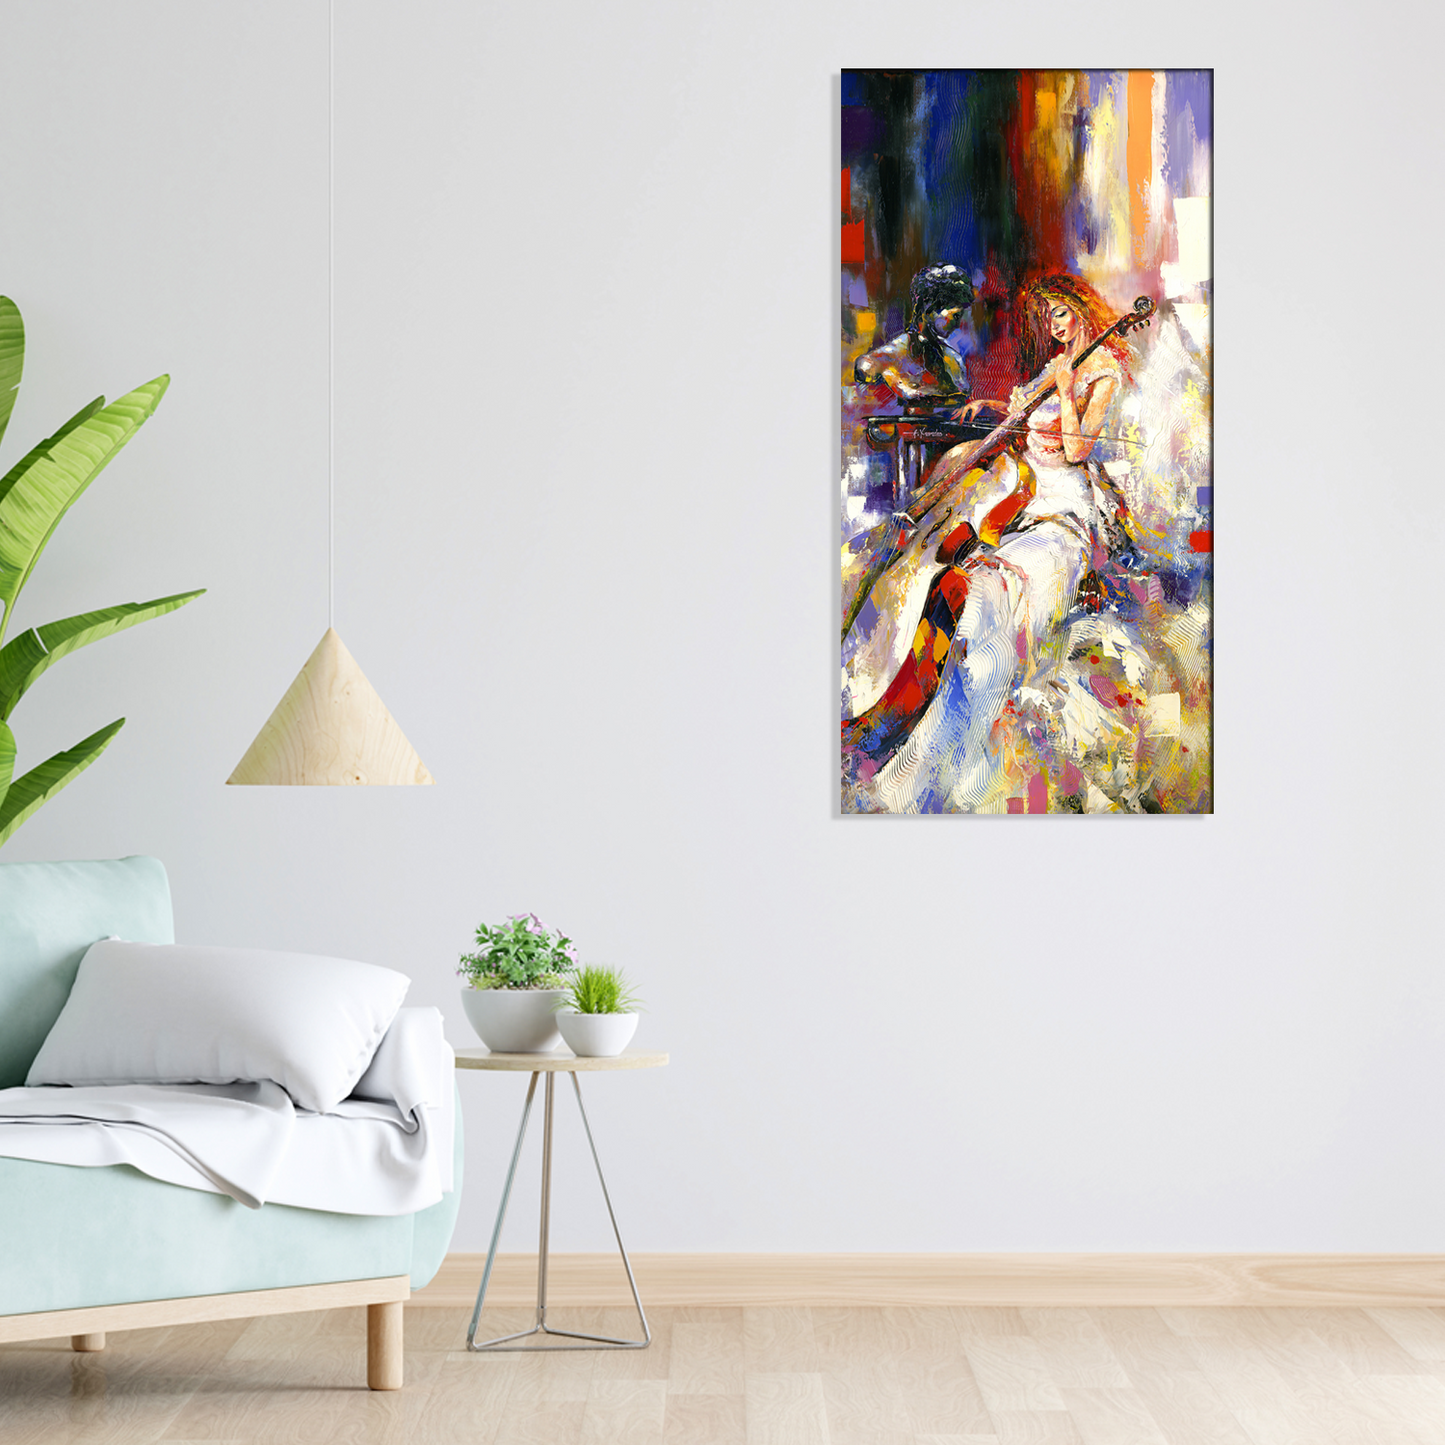 The Girl Plays a Violoncello Abstract Canvas Print Wall Painting